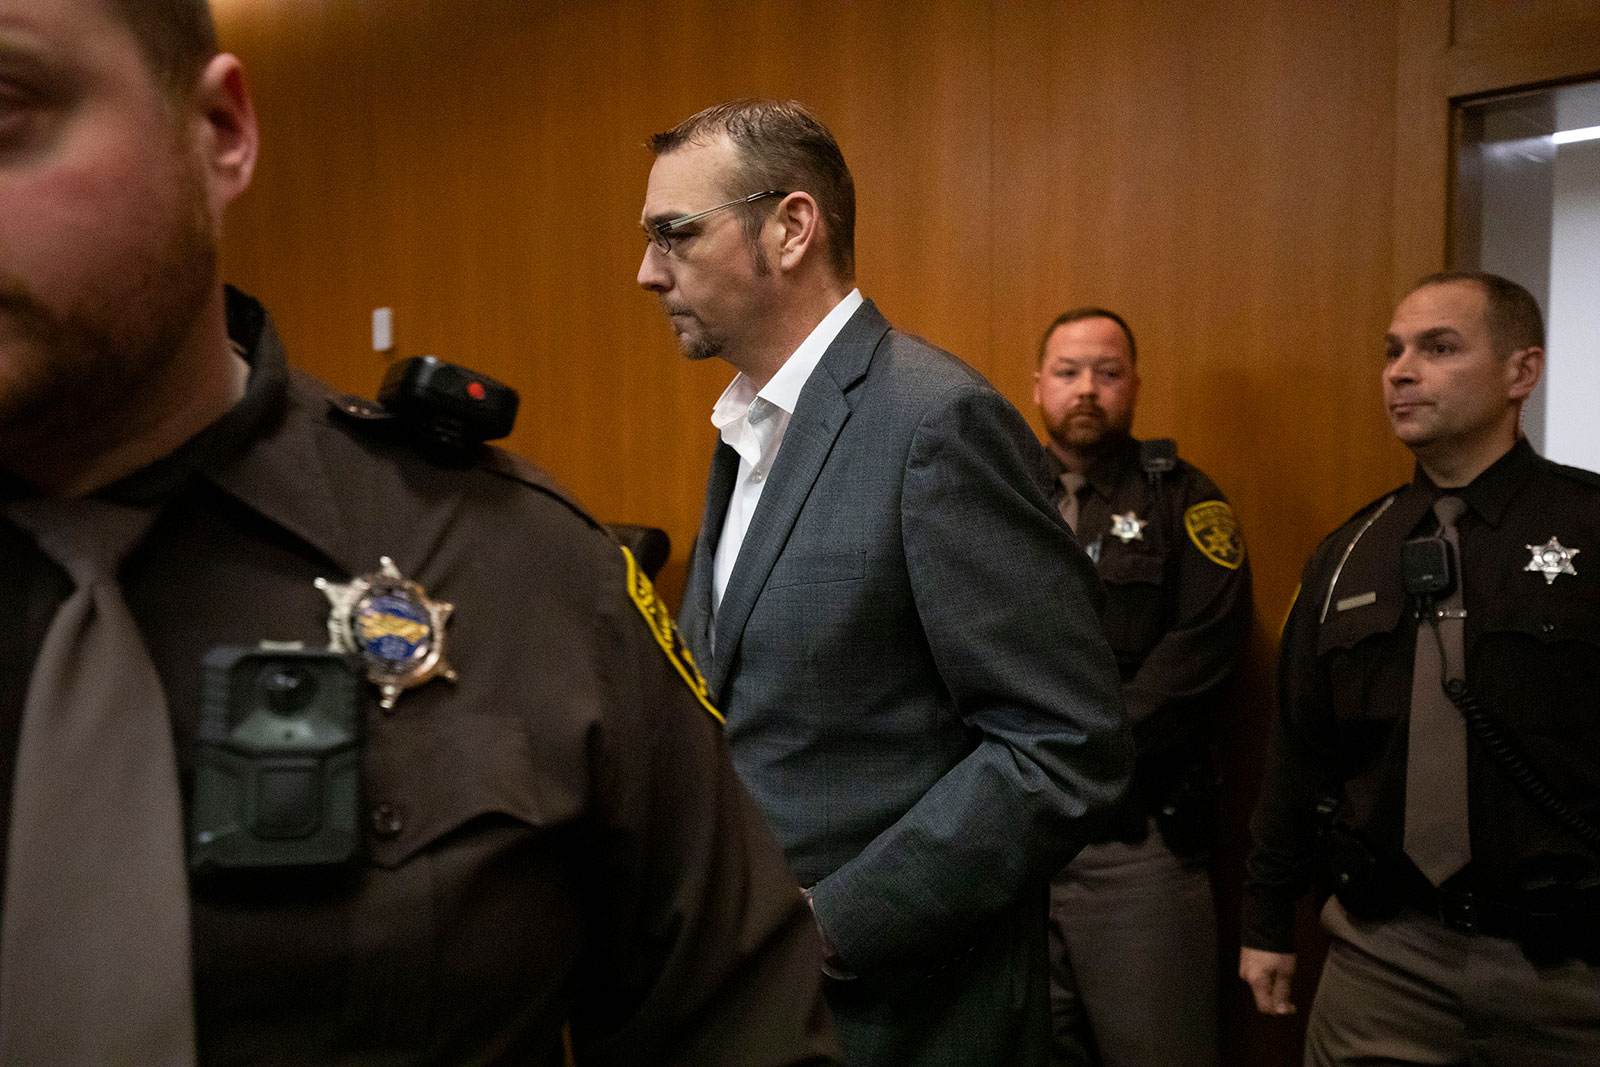 James Crumbley enters the courtroom to hear the jury's verdict on March 14 at Oakland County Circuit Court in Pontiac, Michigan.